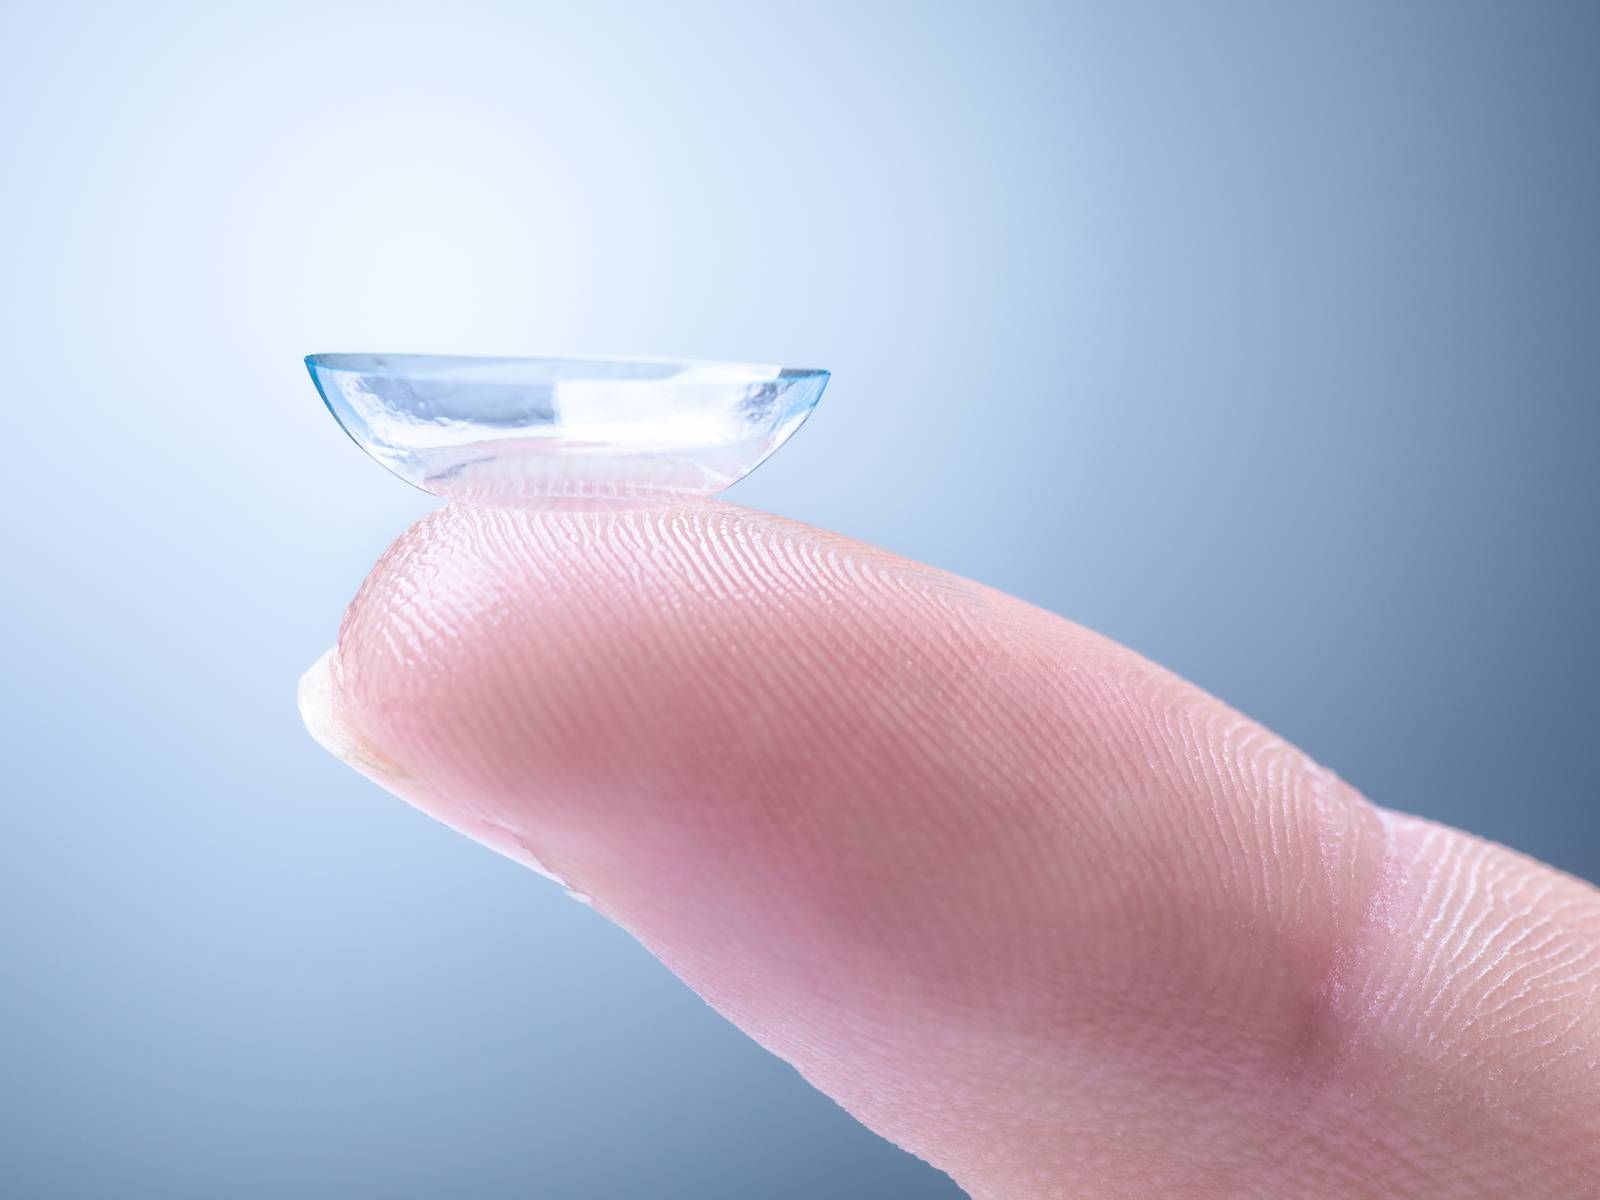 Be very, very careful with removing contact lenses.